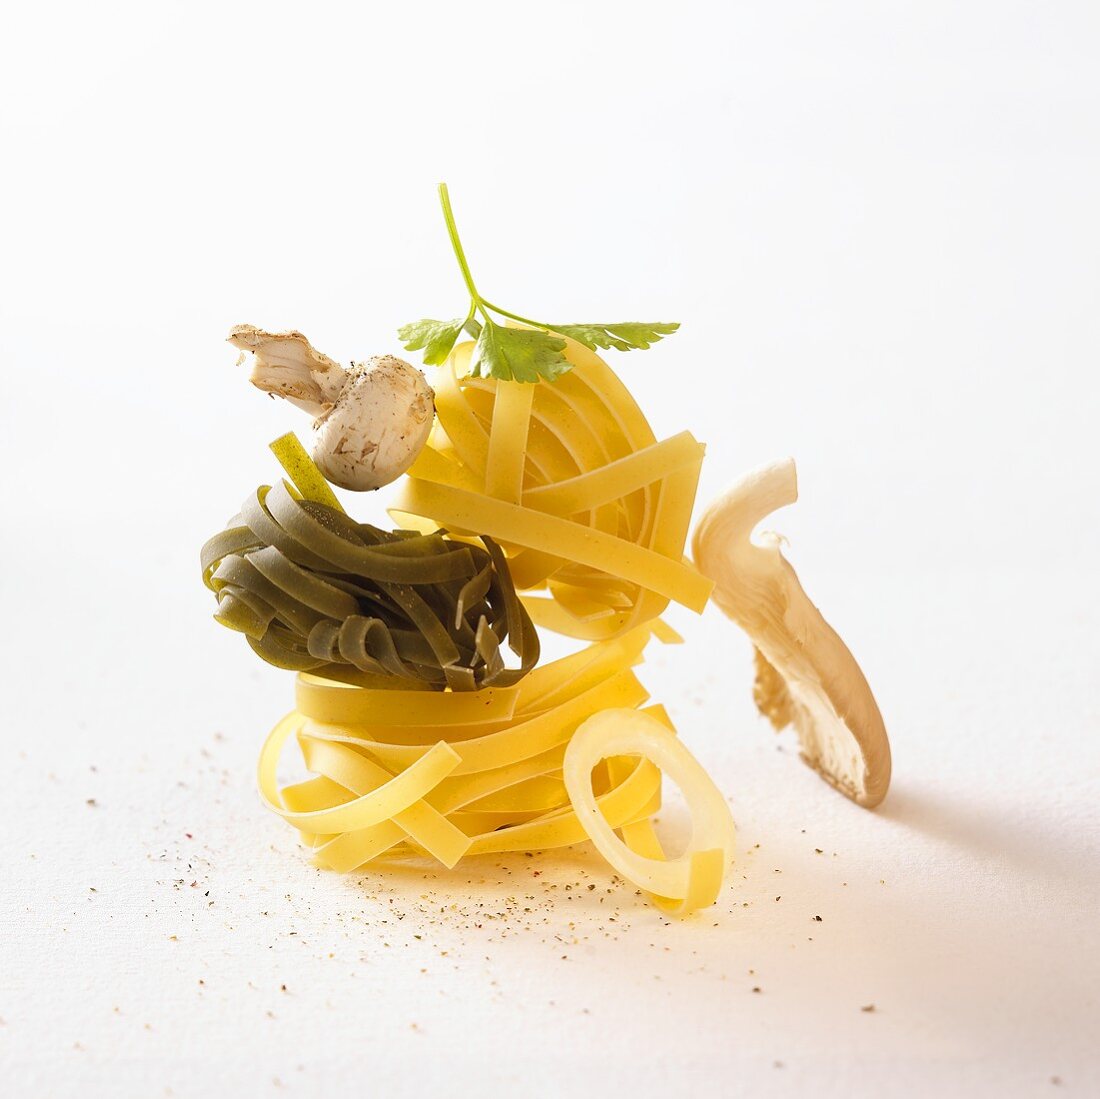 Ingredients for tagliatelle with mushrooms and herbs